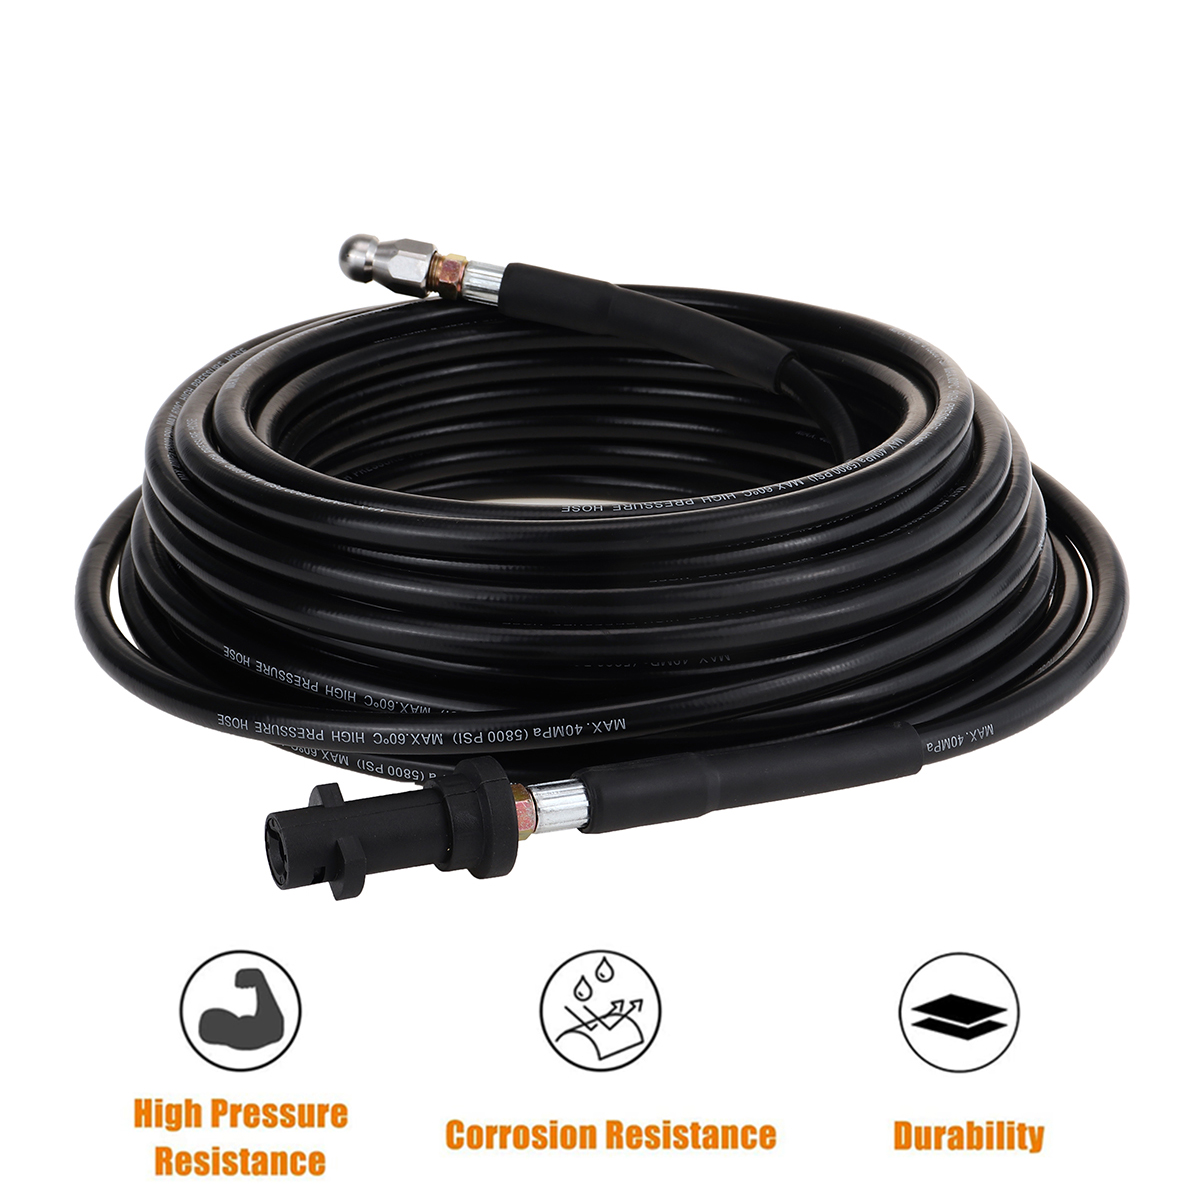 5-20M-Sewer-Jet-Pressure-Washer-Hose-with-Button-Nose-Sewer-Jetter-Nozzle-1720900-2